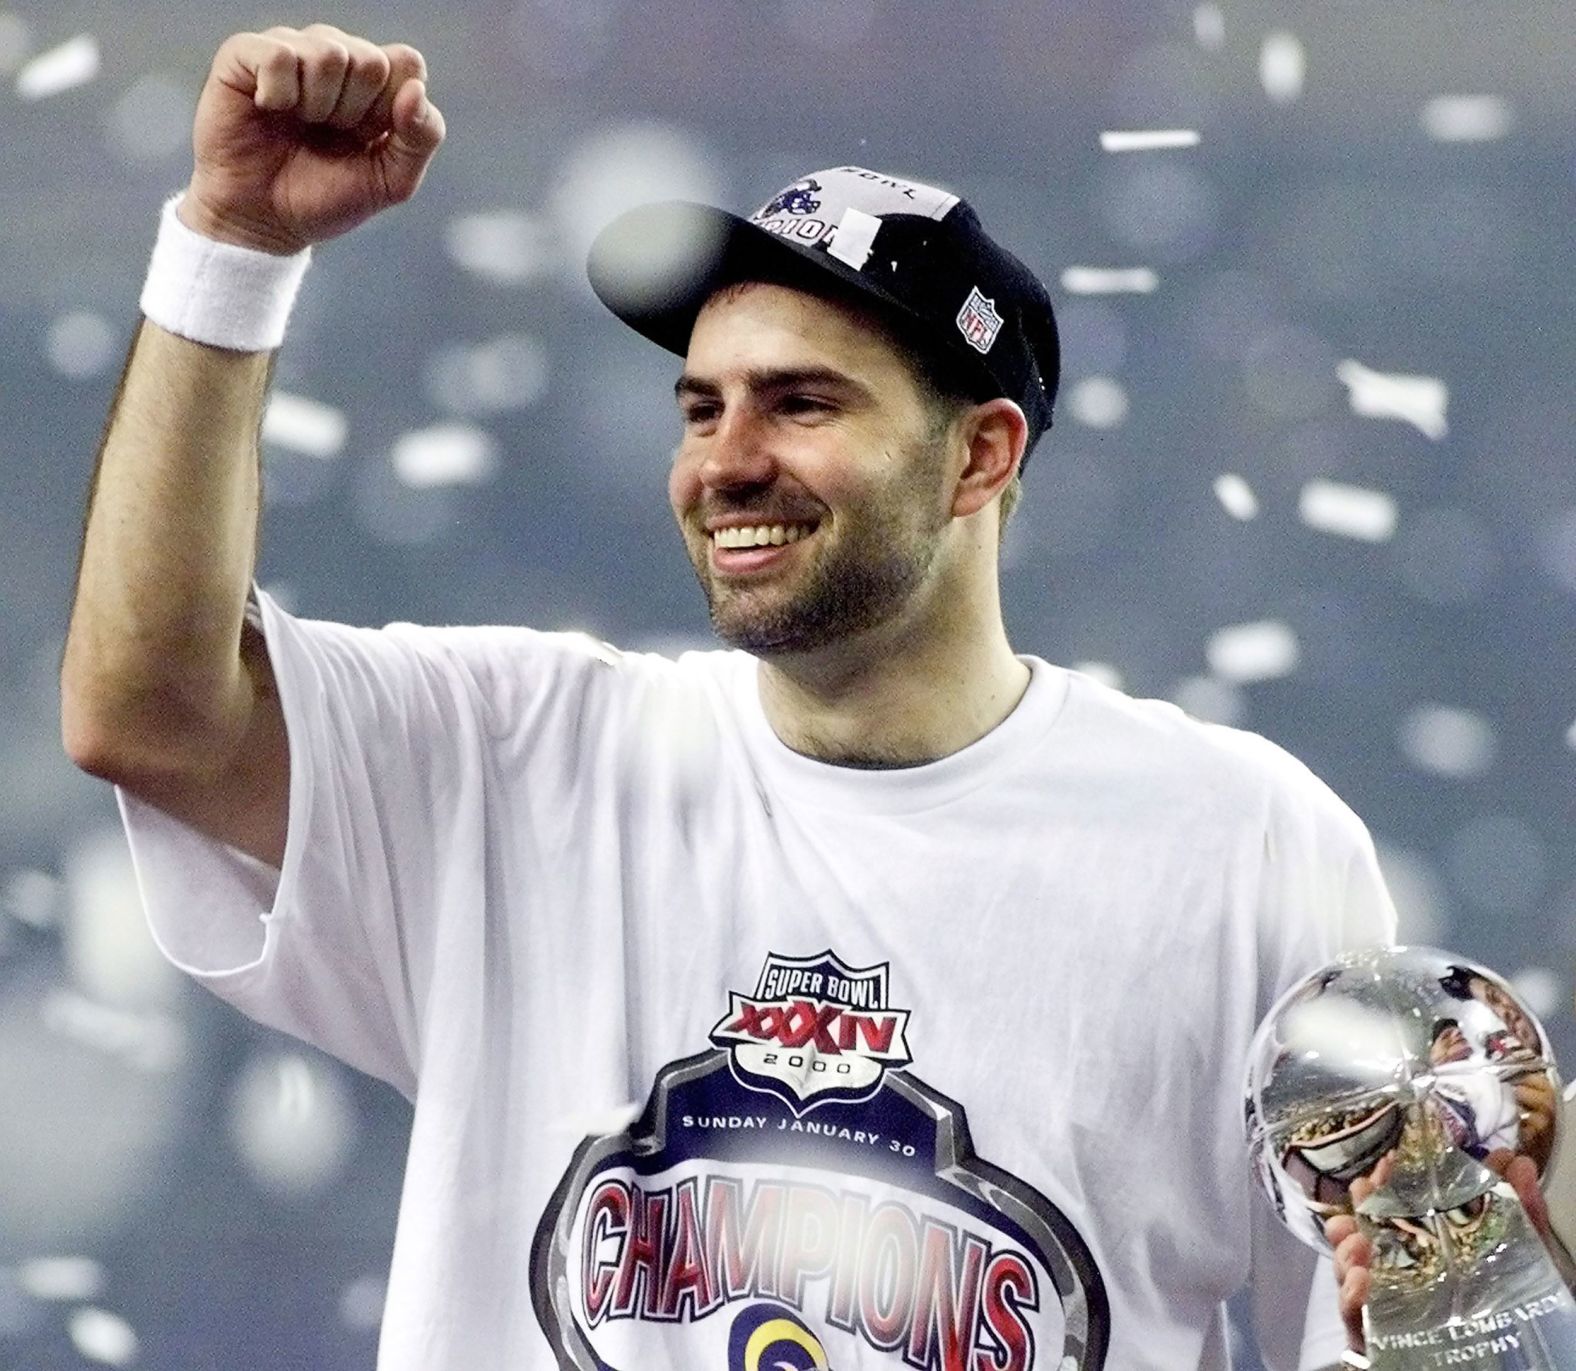 <strong>Super Bowl XXXIV (2000):</strong> MVP quarterback Kurt Warner celebrates after leading the St. Louis Rams to a 23-16 victory over Tennessee in Super Bowl XXXIV. Warner threw for a Super Bowl-record 414 yards, leading an offense that had been nicknamed "The Greatest Show on Turf."